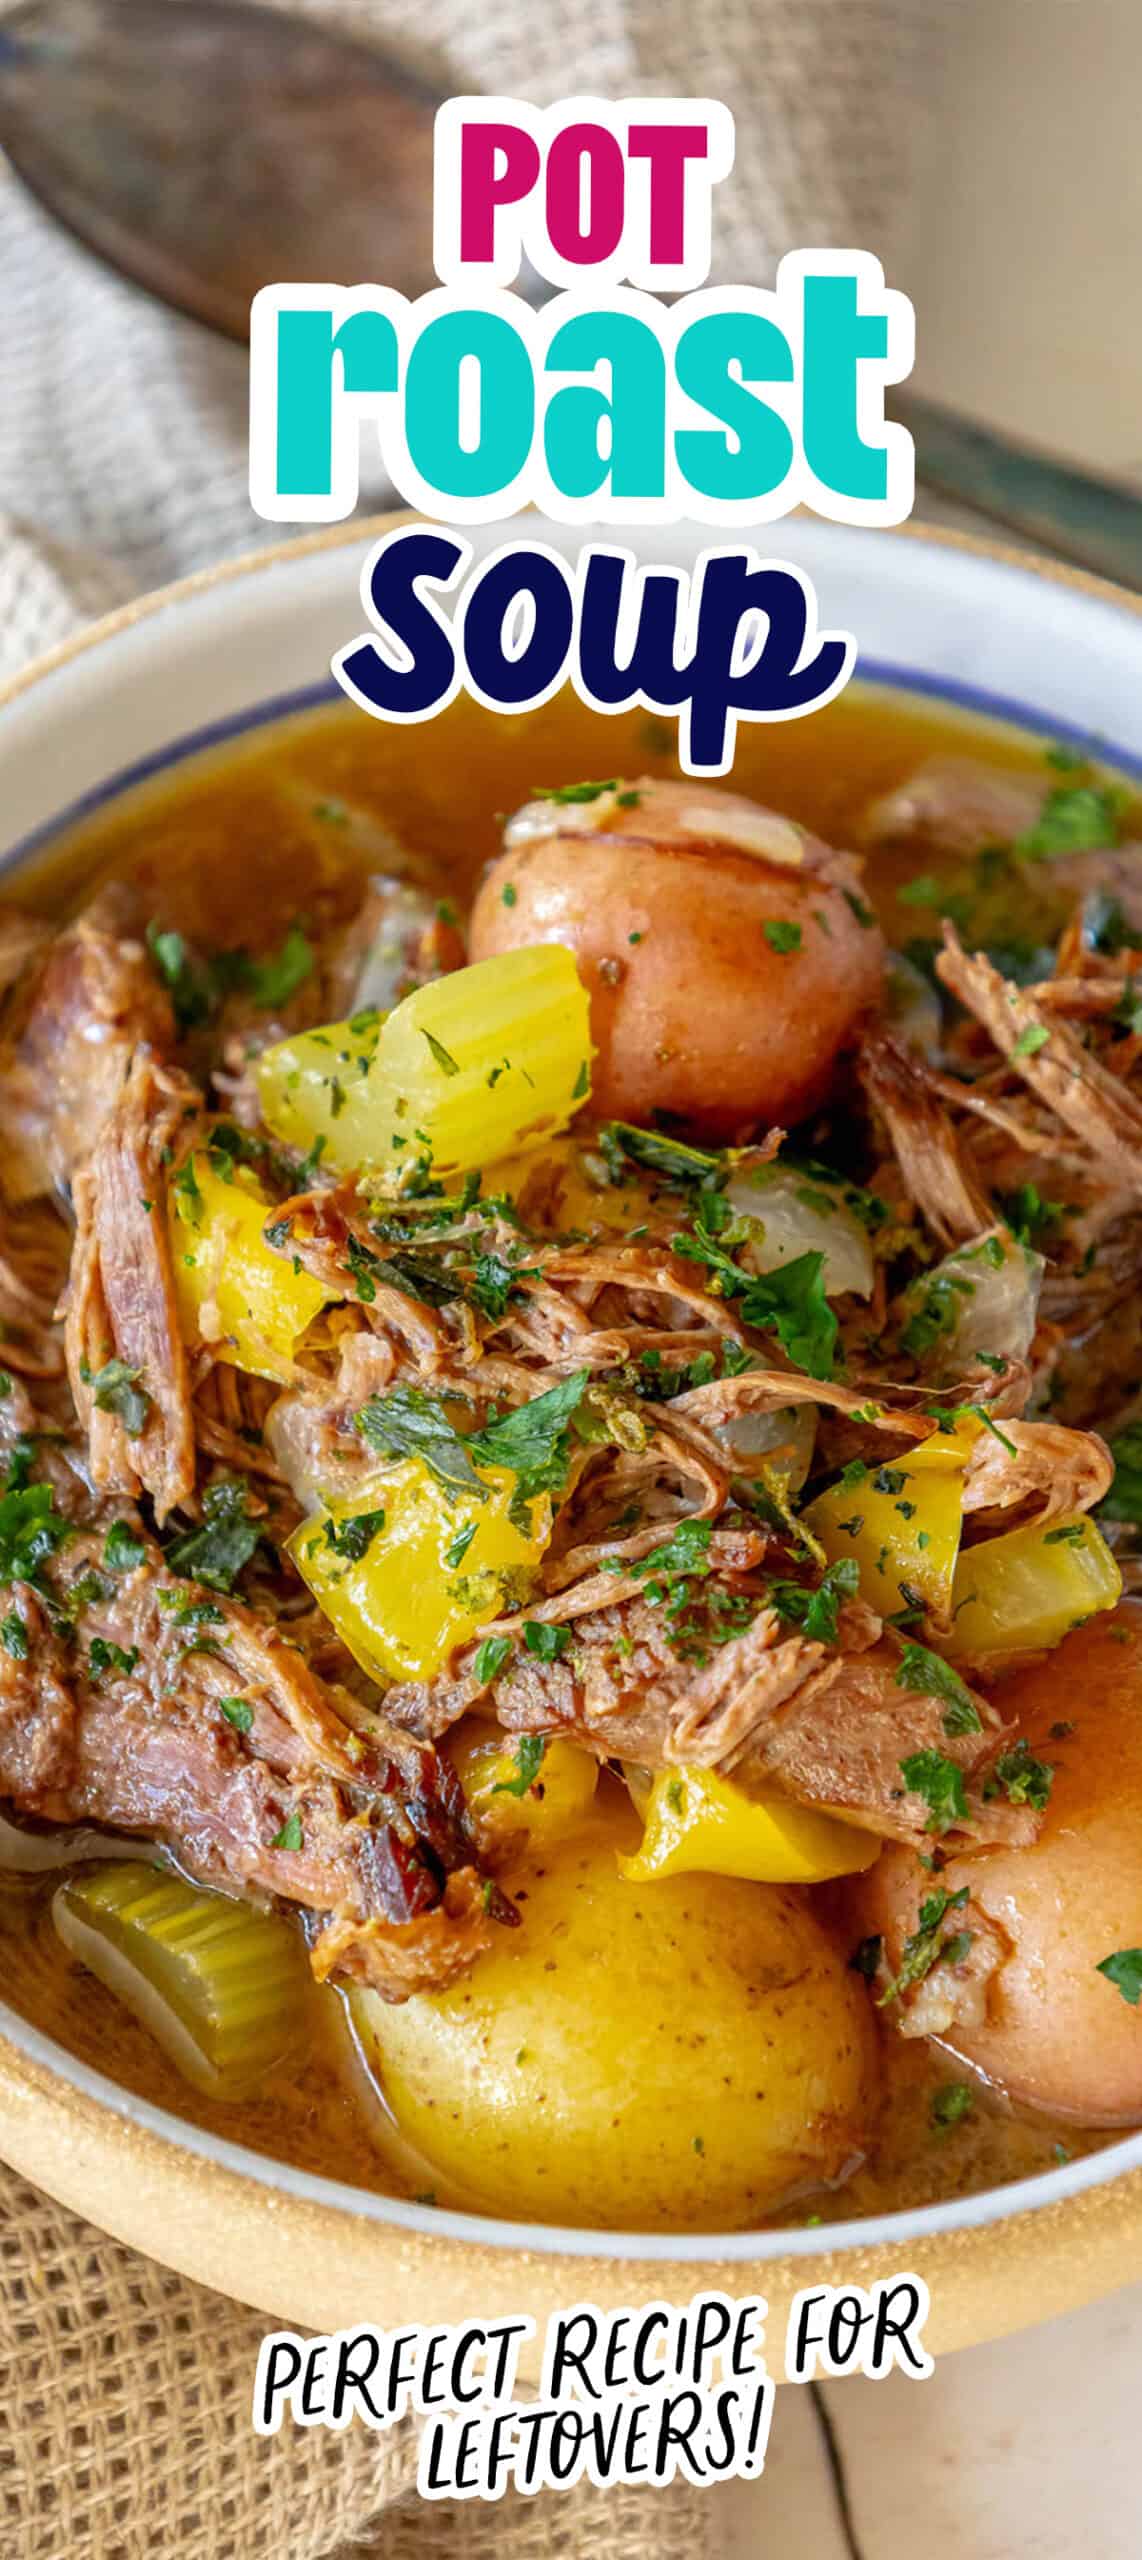 A hearty pot roast soup filled with tender chunks of meat, creamy potatoes, and flavorful carrots.